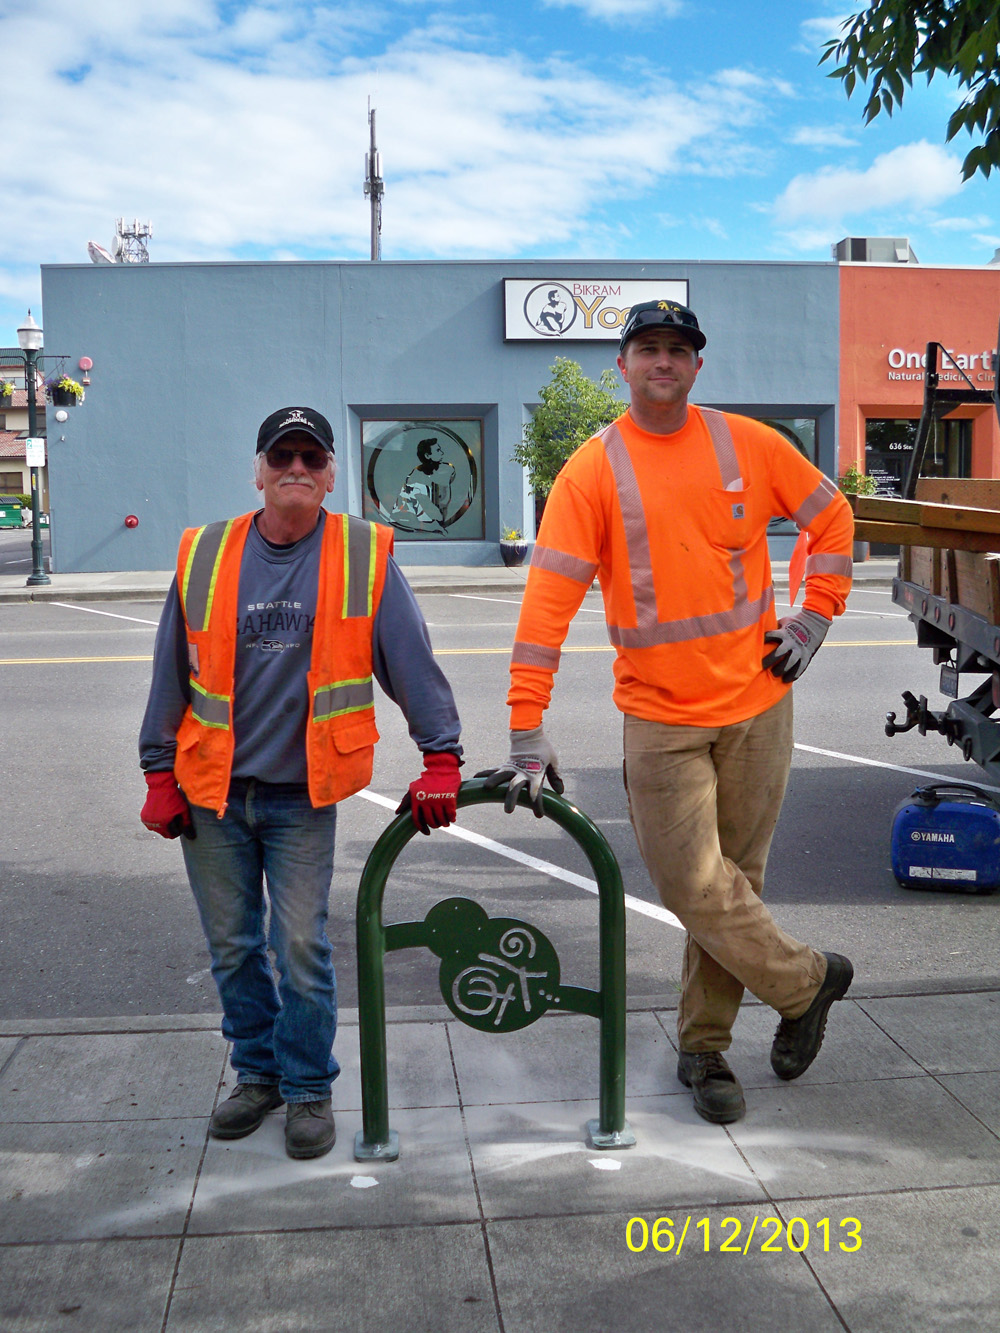 Bike Racks Installed in Burien’s Public Right-of-Way This Morning